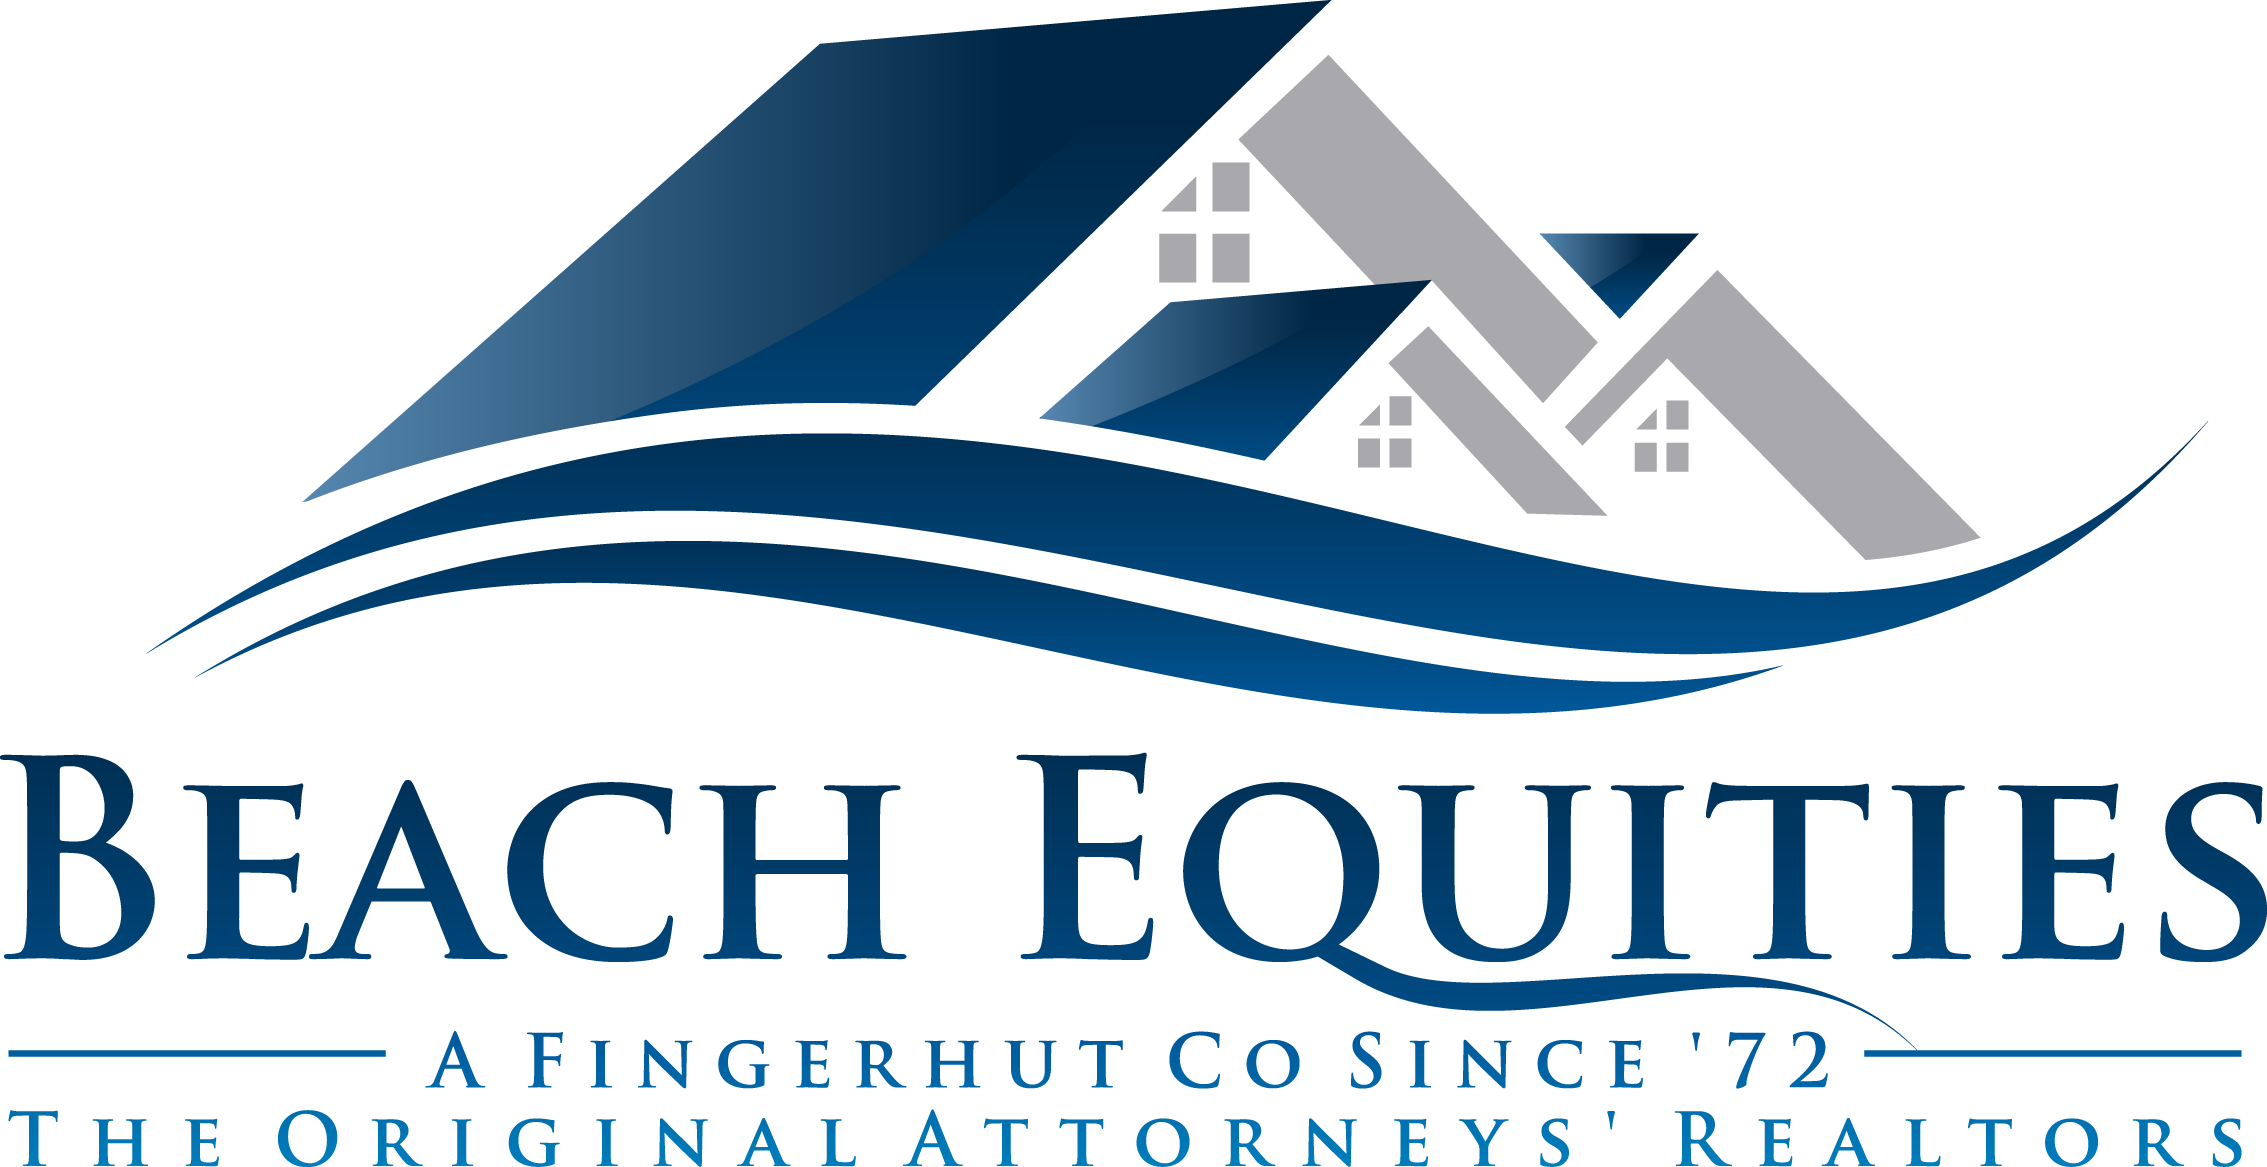 This month's speaker is sponsored by <br>Beach Equities, the Original Probate Realtor, Paige Fingerhut-Charnick